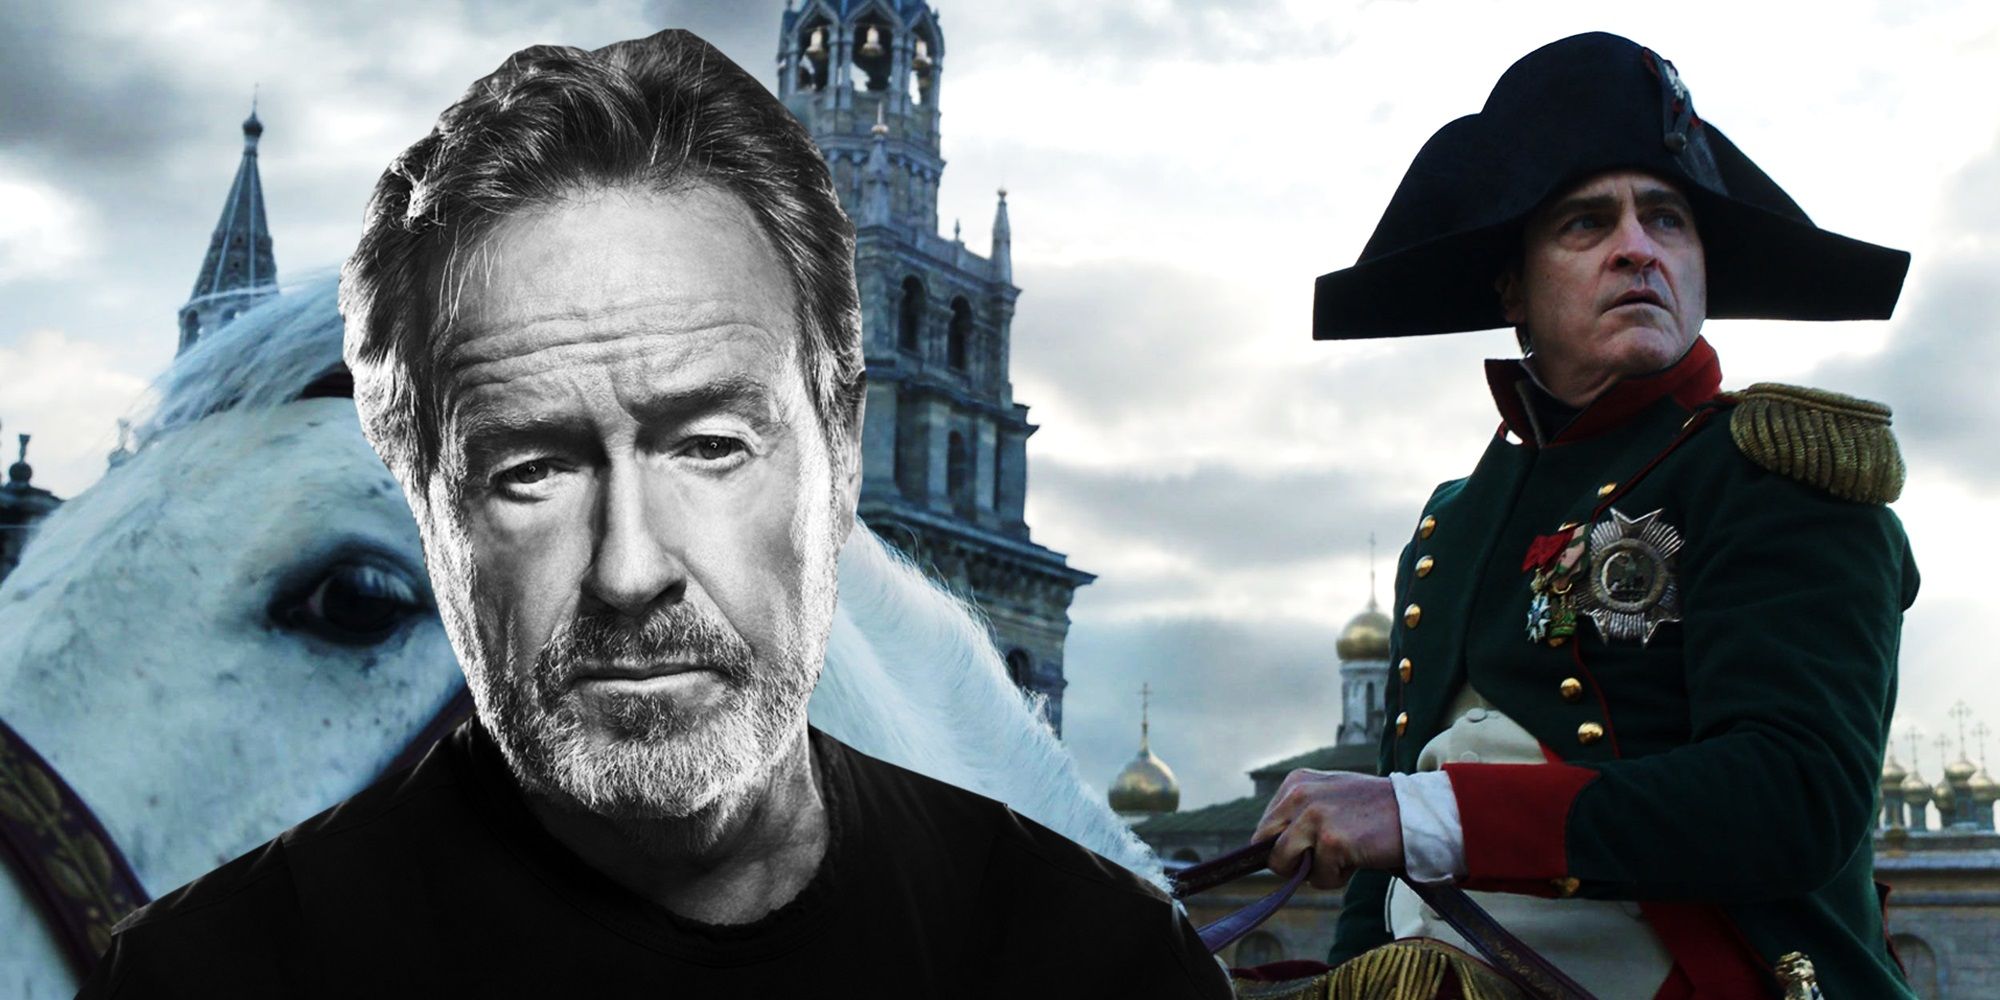 Ridley Scott superimposed on a screenshot from Napoleon